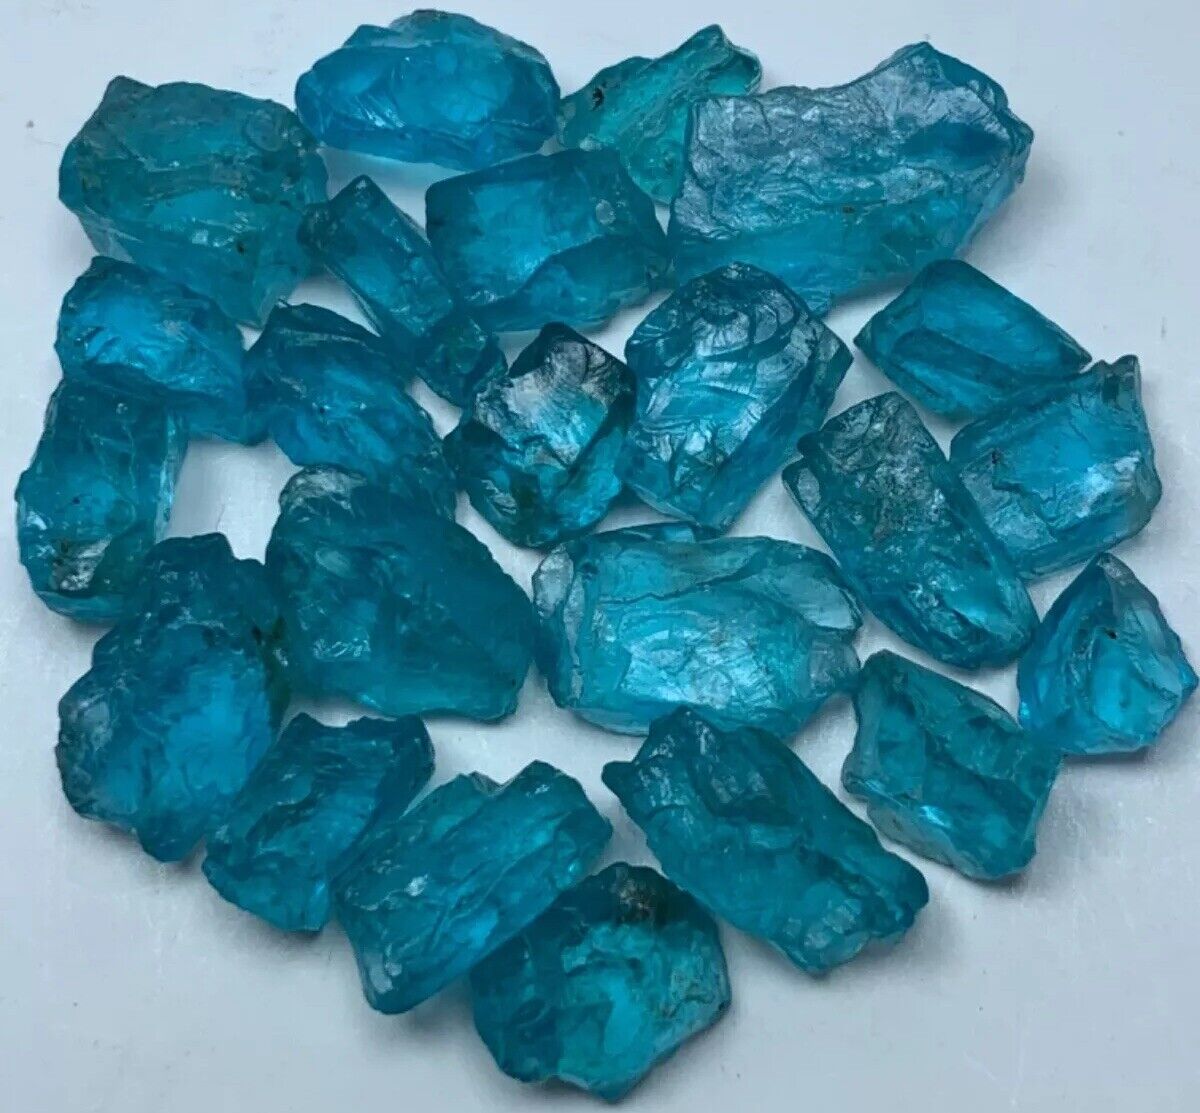 91 Carats Facet Grade rough Blue Apatite From Madagascar , For lapidary